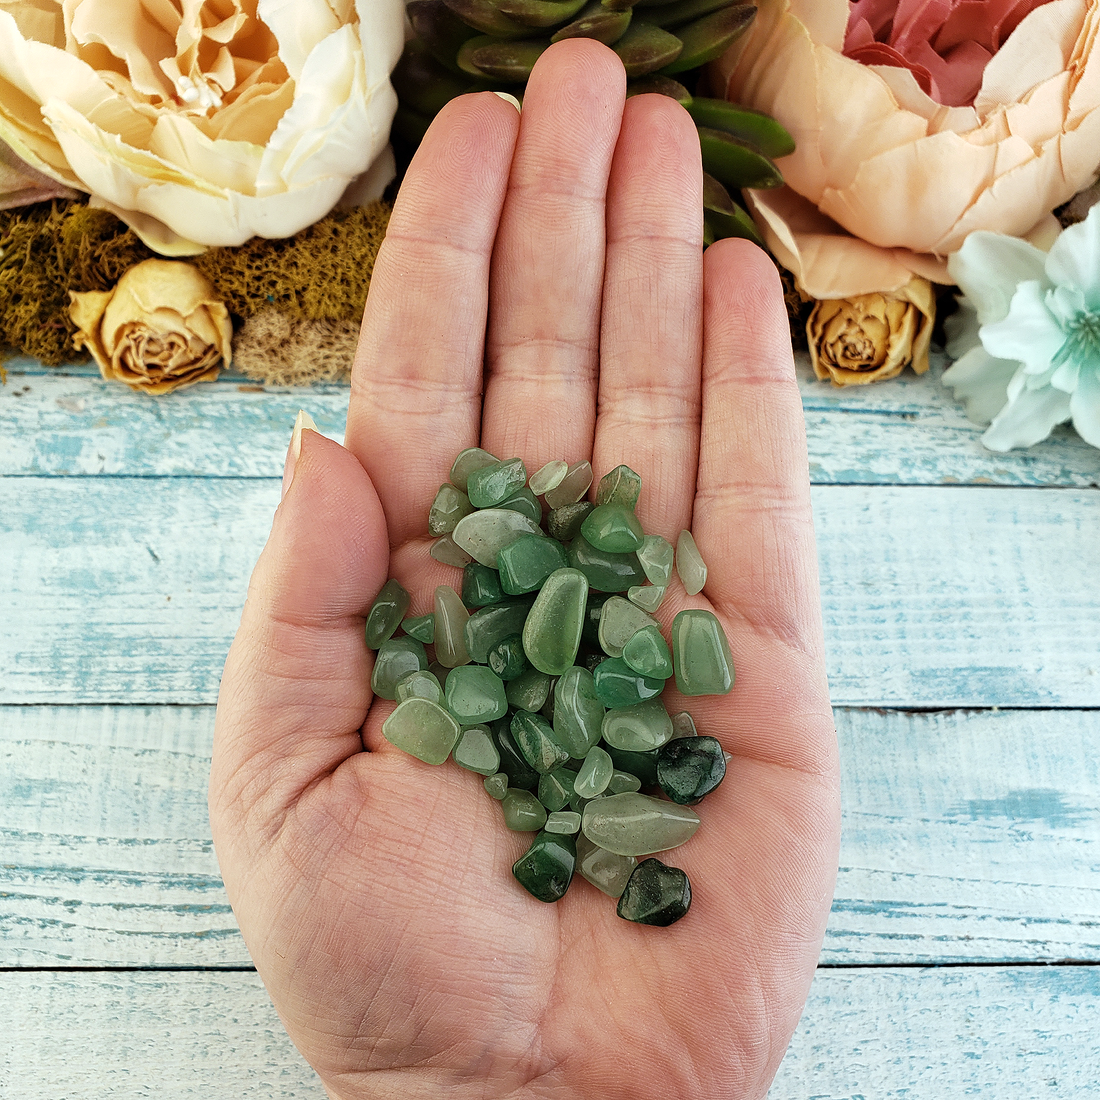 Green Aventurine Polished Gemstone Chips - By the Ounce - In Palm of Hand